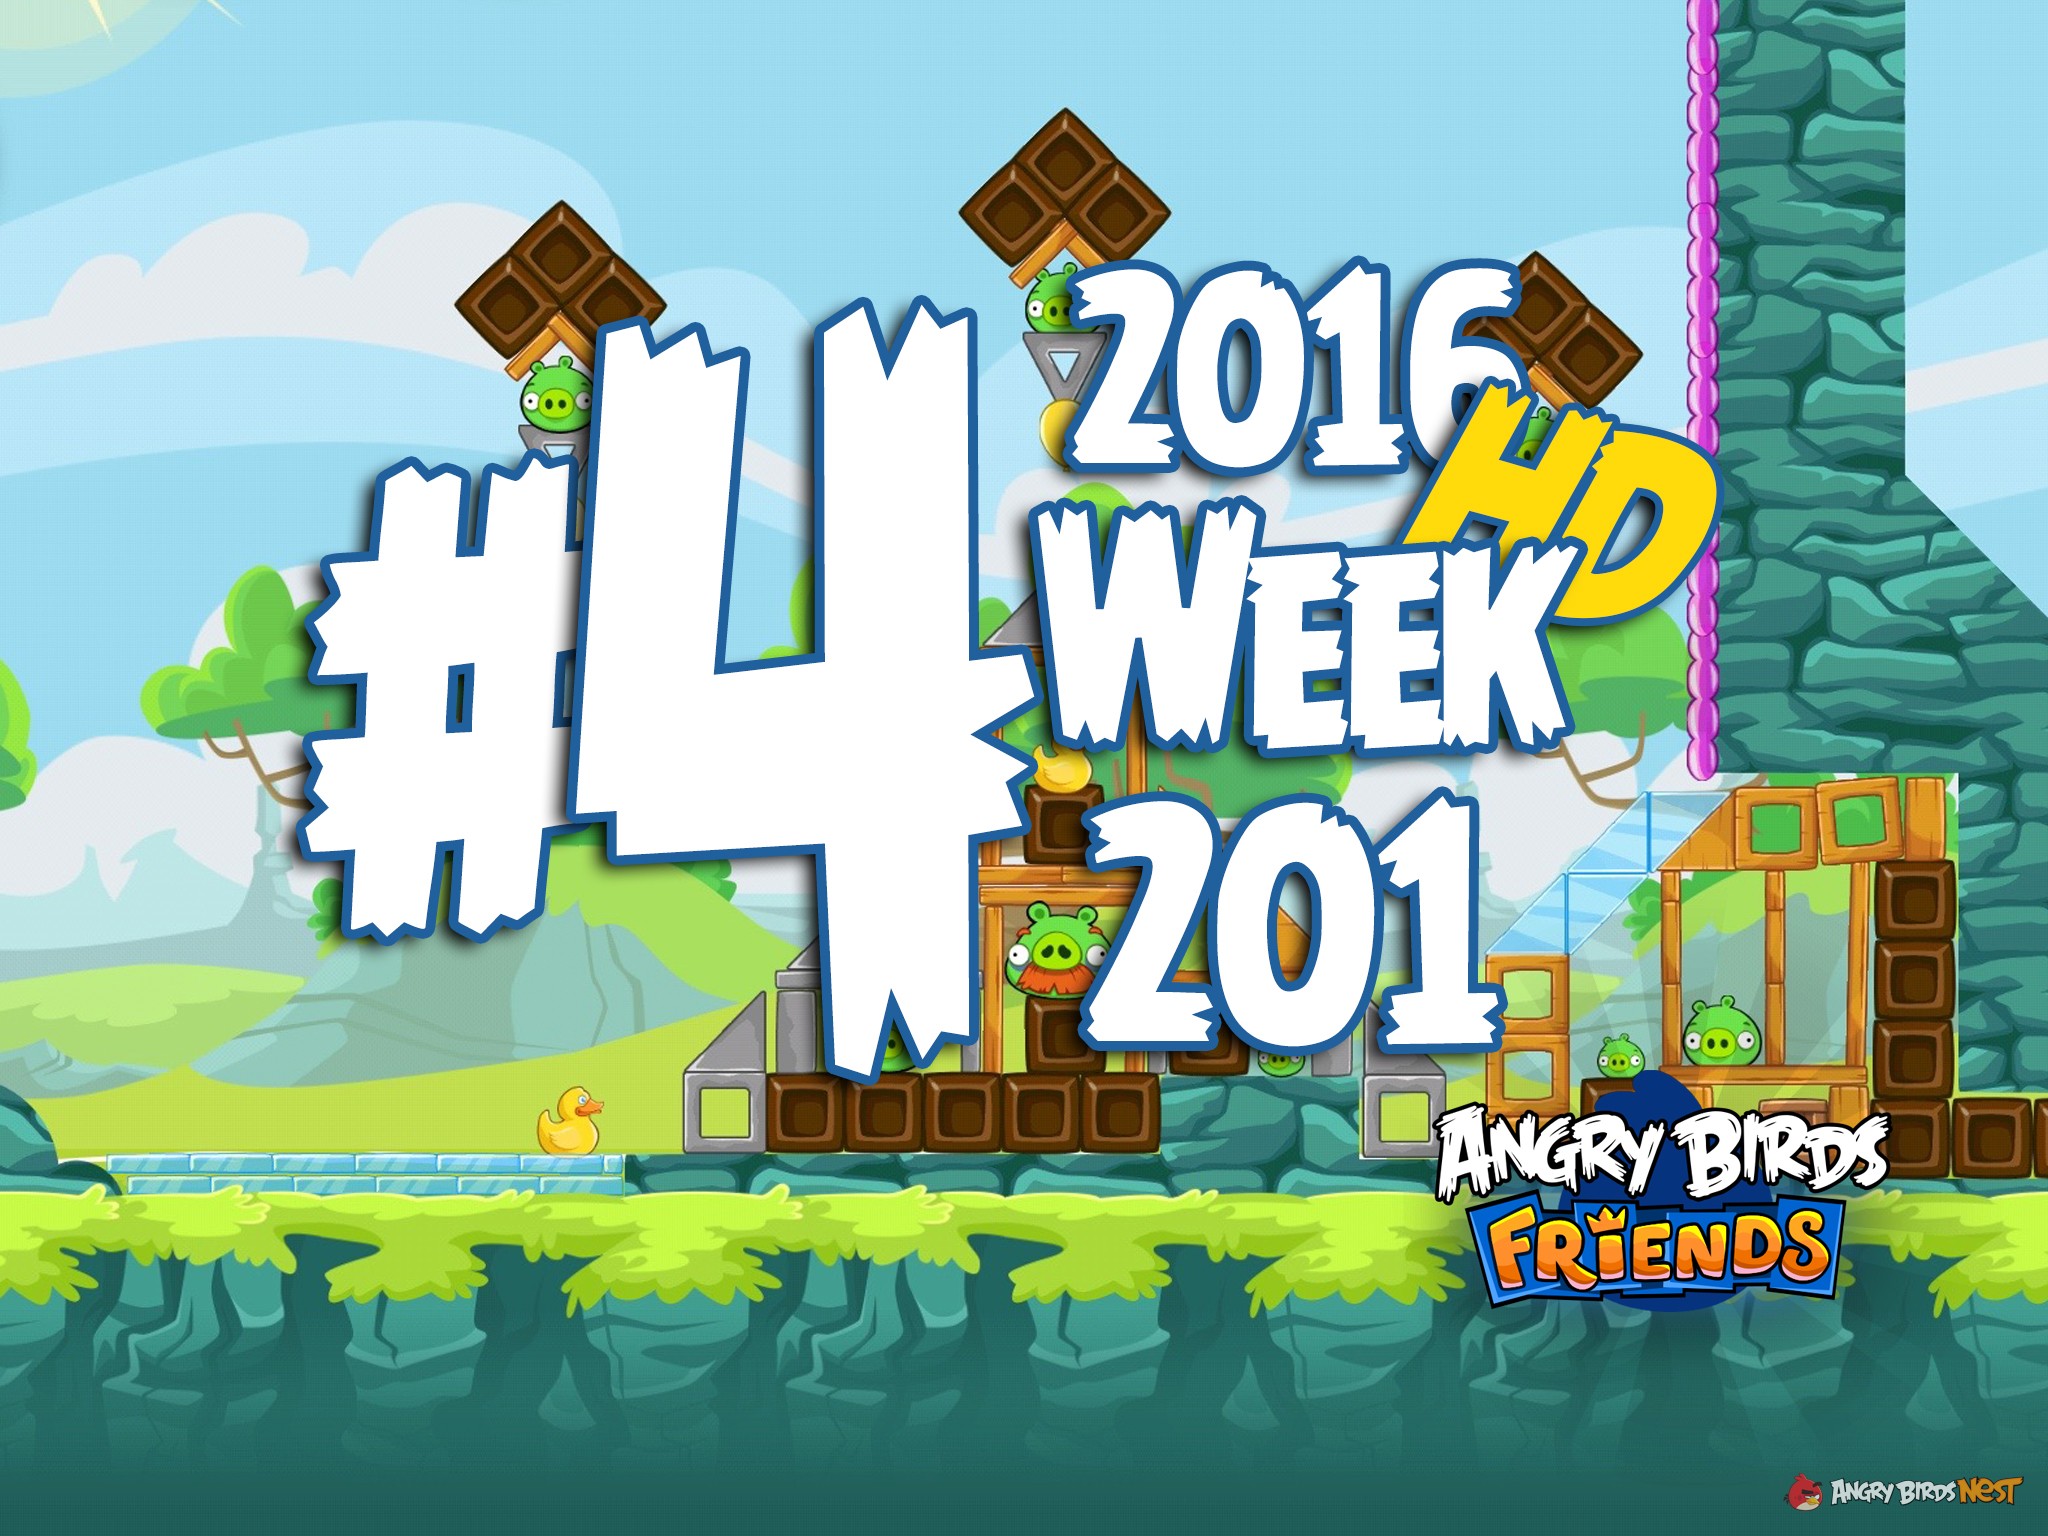 Angry Birds Friends Week 201 Level 4